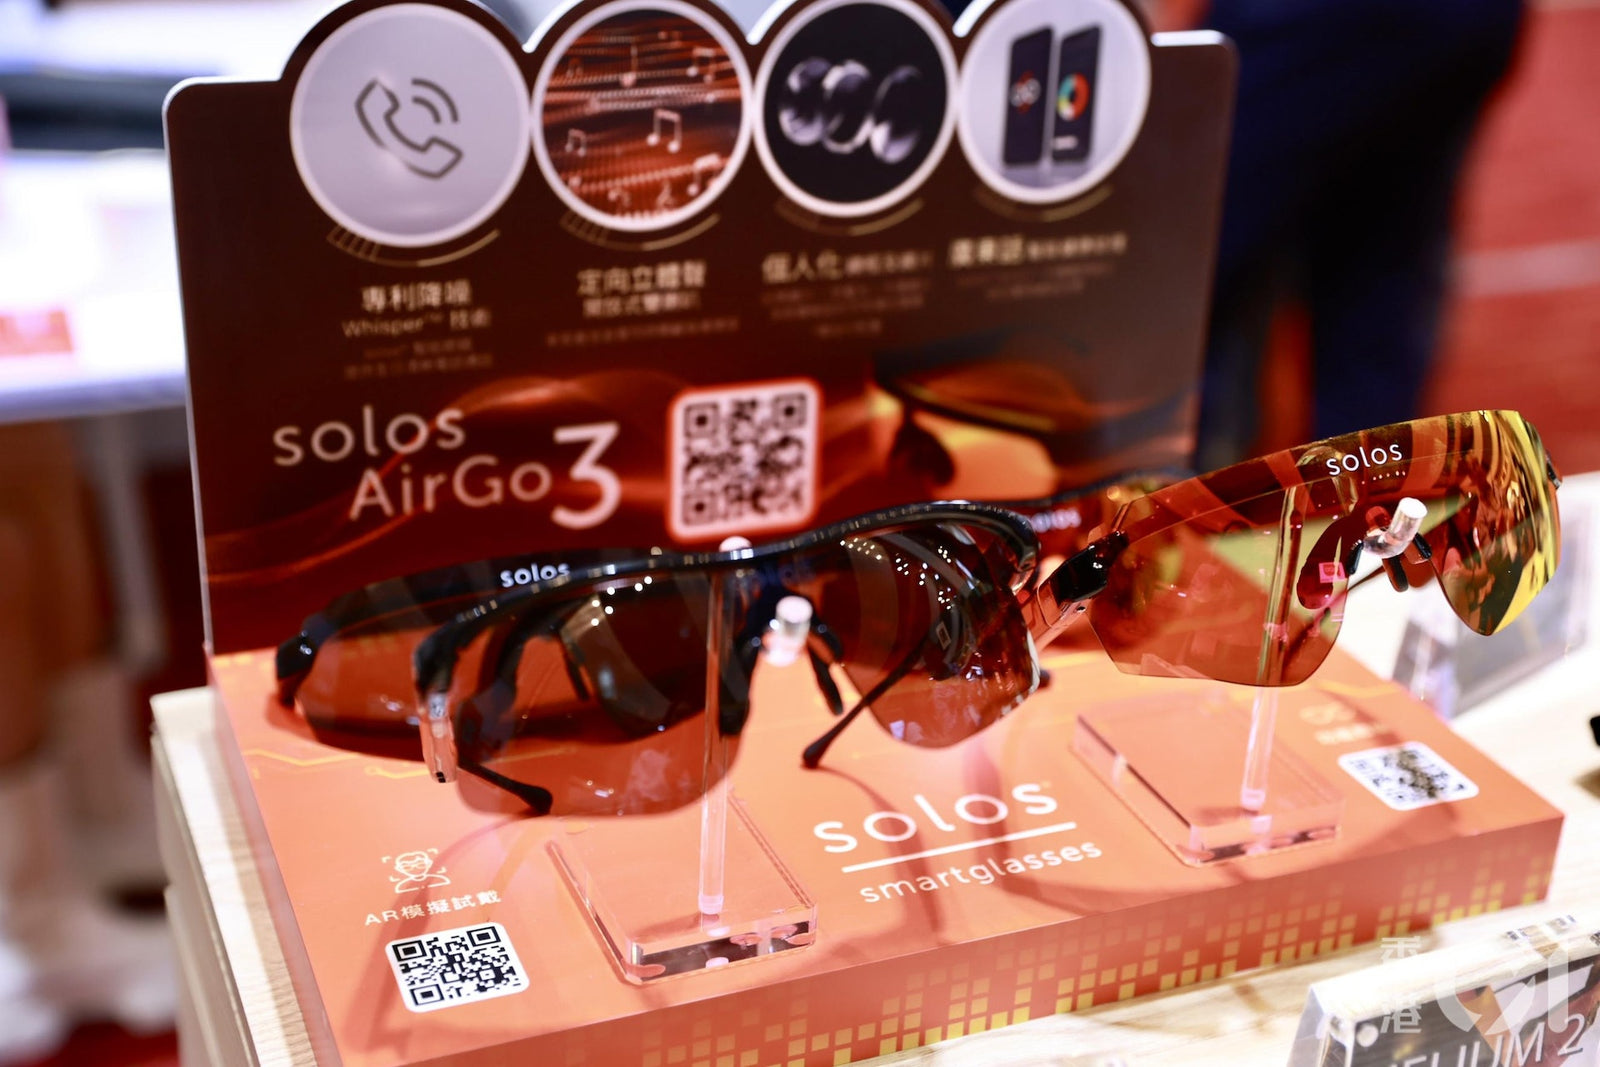 Hong Kong International Optical Fair Starts Today - Smart Glasses with ChatGPT Functionality Comparable to Mobile Phones | HK01 | AirGo™3 - Solos Technology Limited